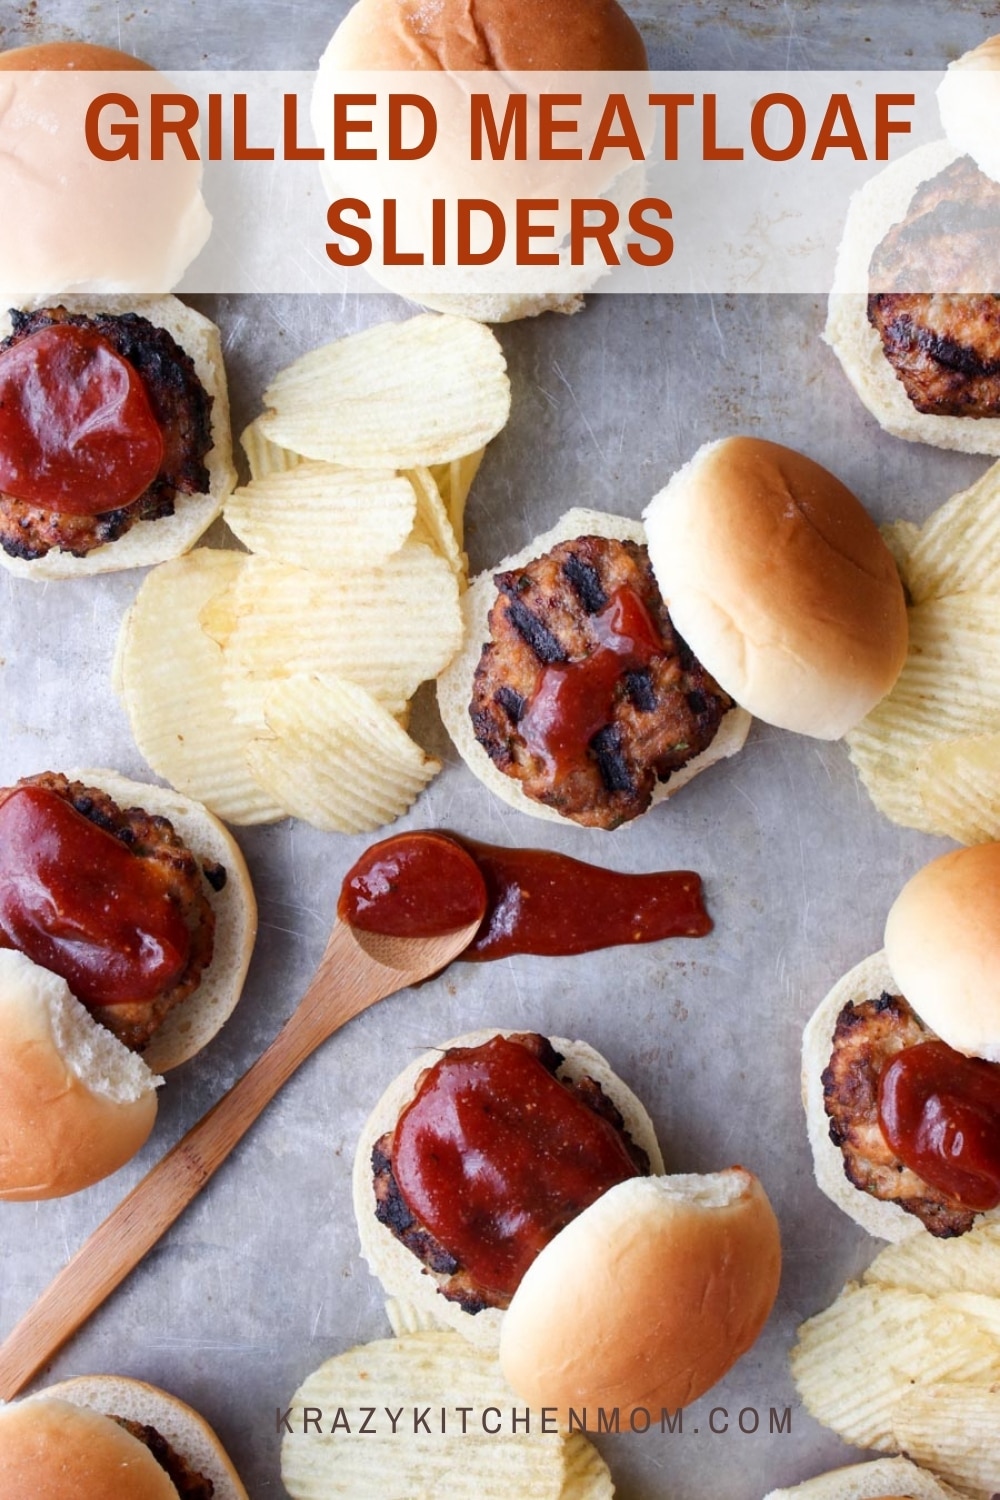 Grilled Meatloaf Sliders are a whole new way to enjoy a family favorite. Mama's classic meatloaf meets family-friendly handheld grilled sliders. As an afternoon snack, a family cookout, or a casual dinner on the patio, sliders are always a big hit. via @krazykitchenmom